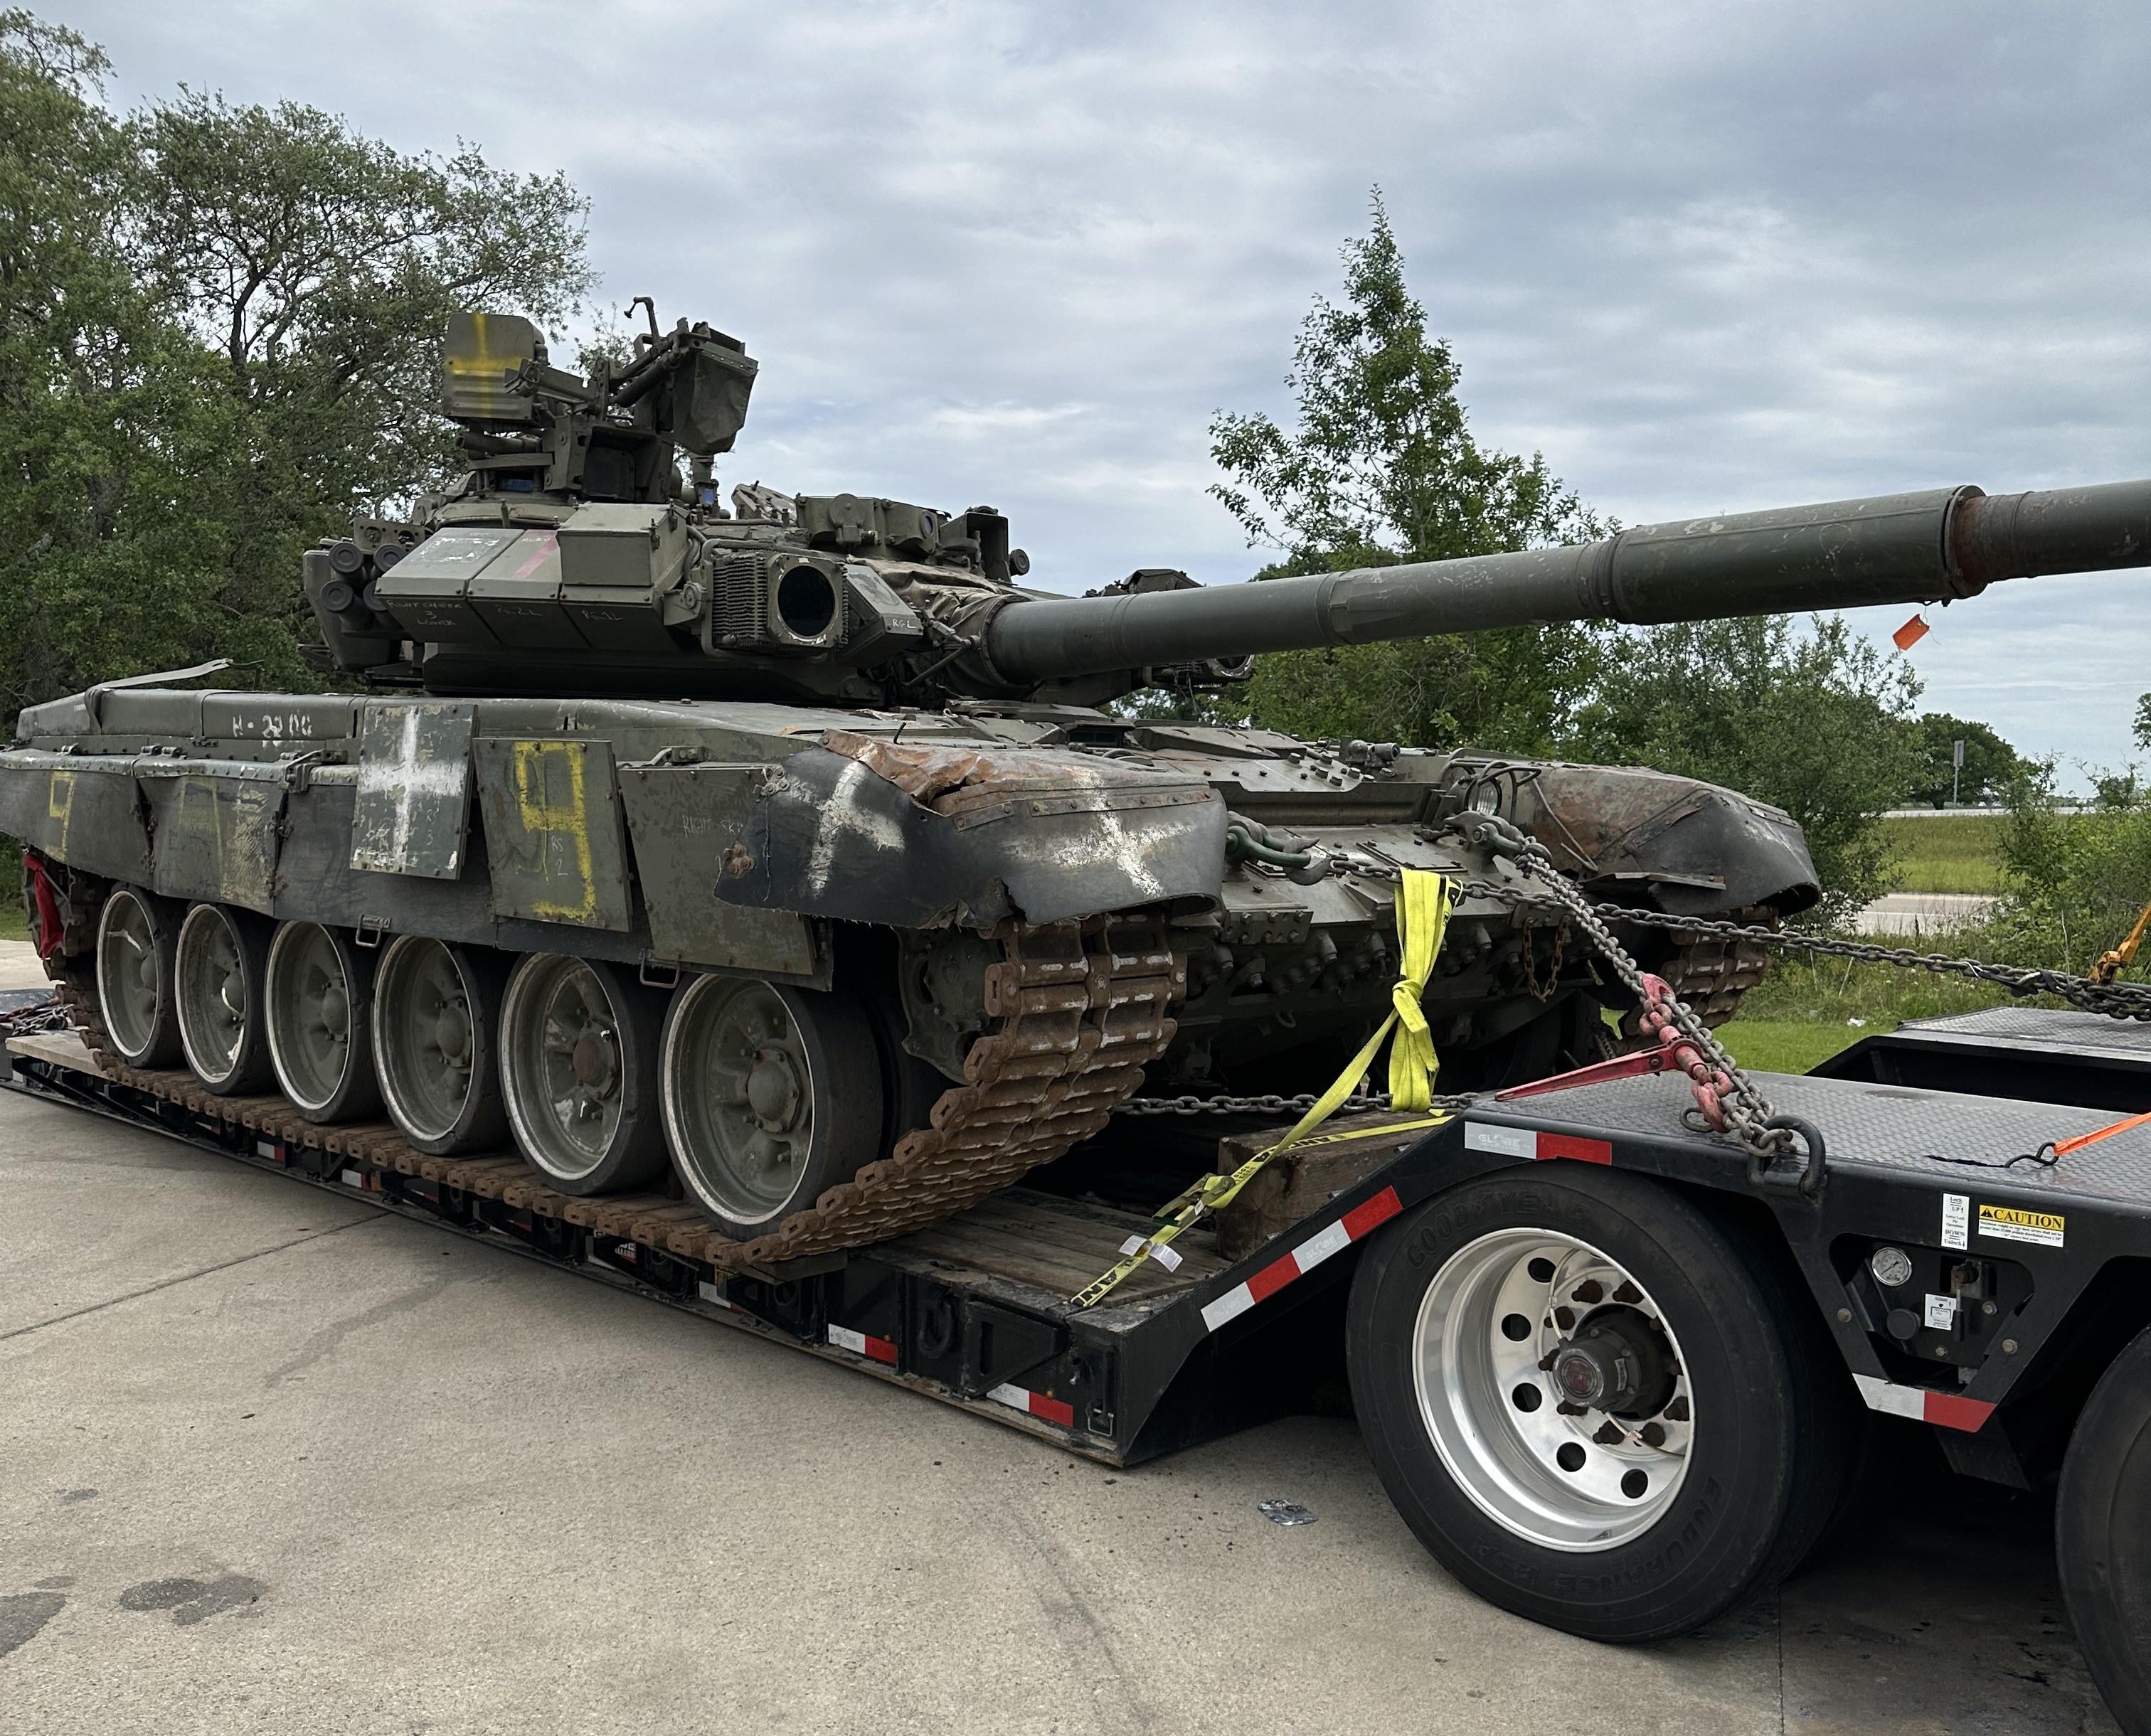 A modern Russian T-90A tank was brought to the U.S.; it was captured by the AFU last year